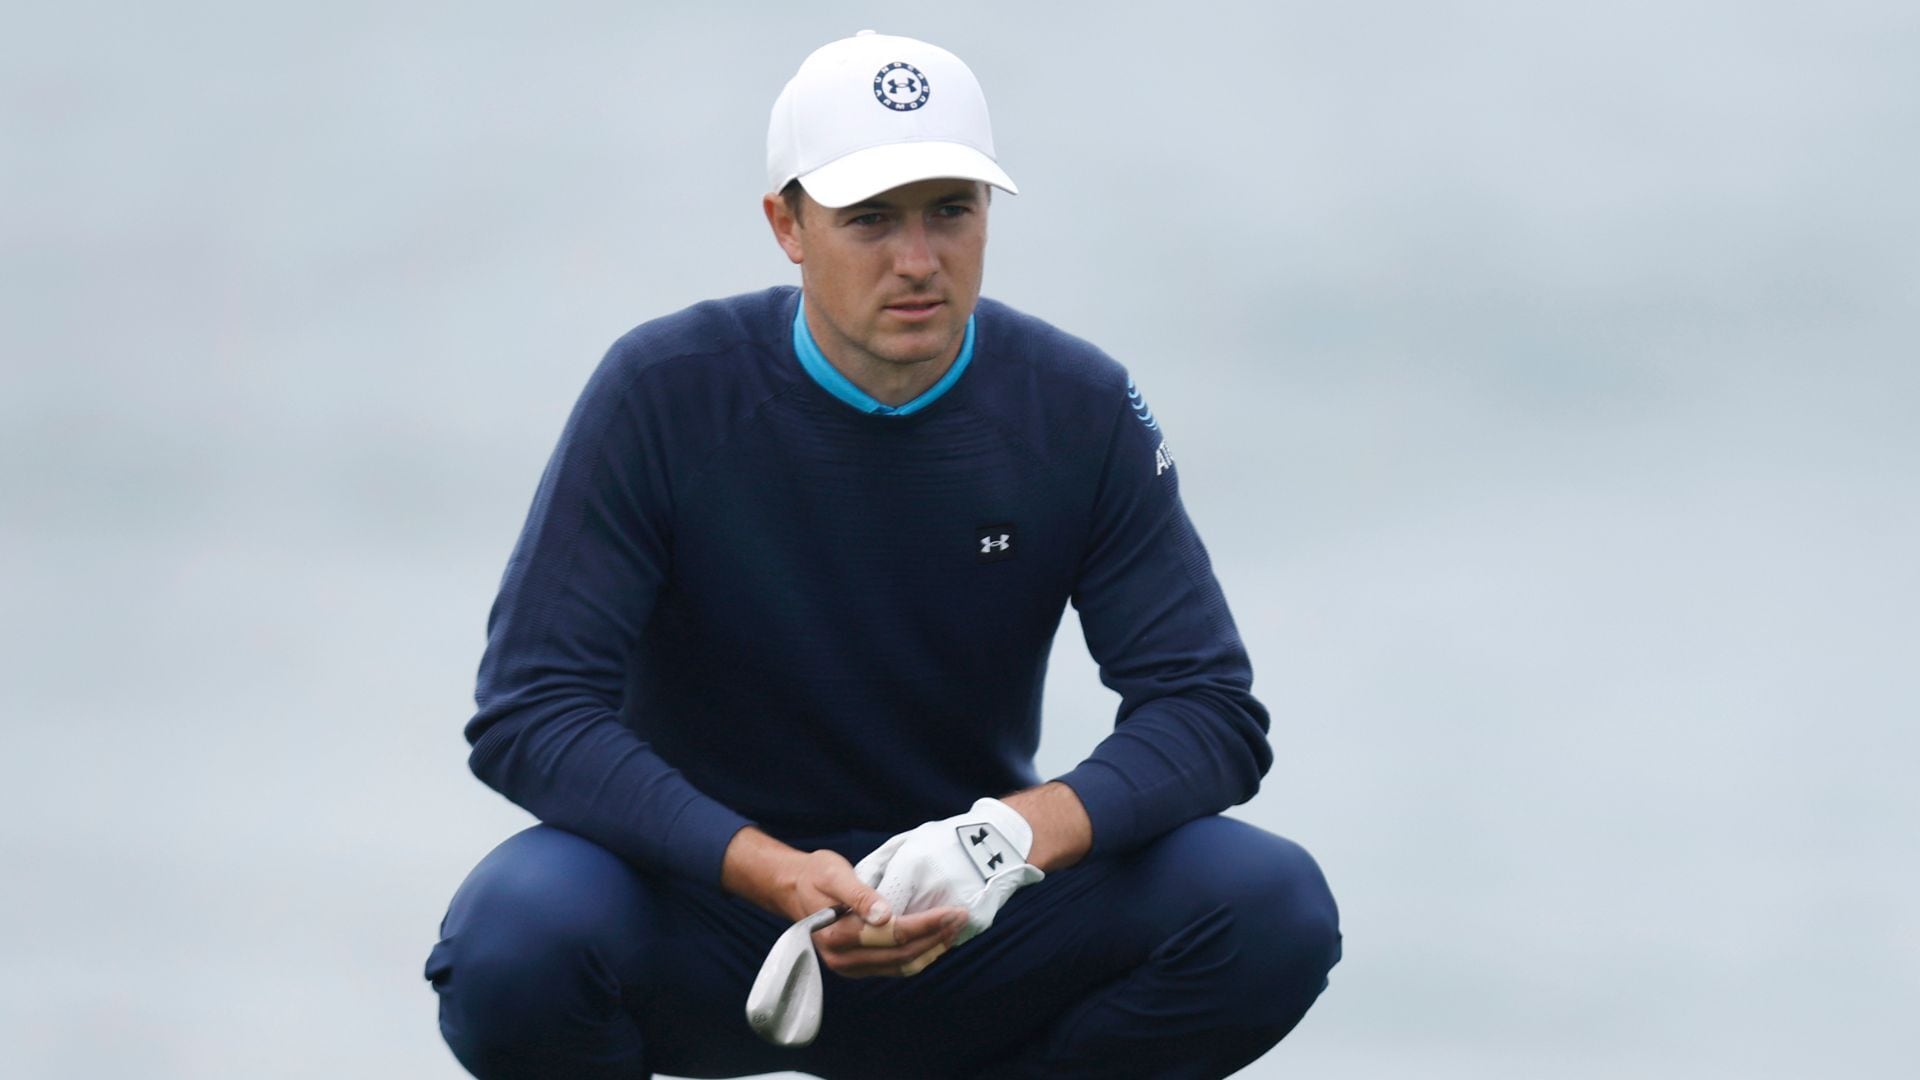 Watch: Jordan Spieth punches 7-iron onto 7th green at windy Pebble